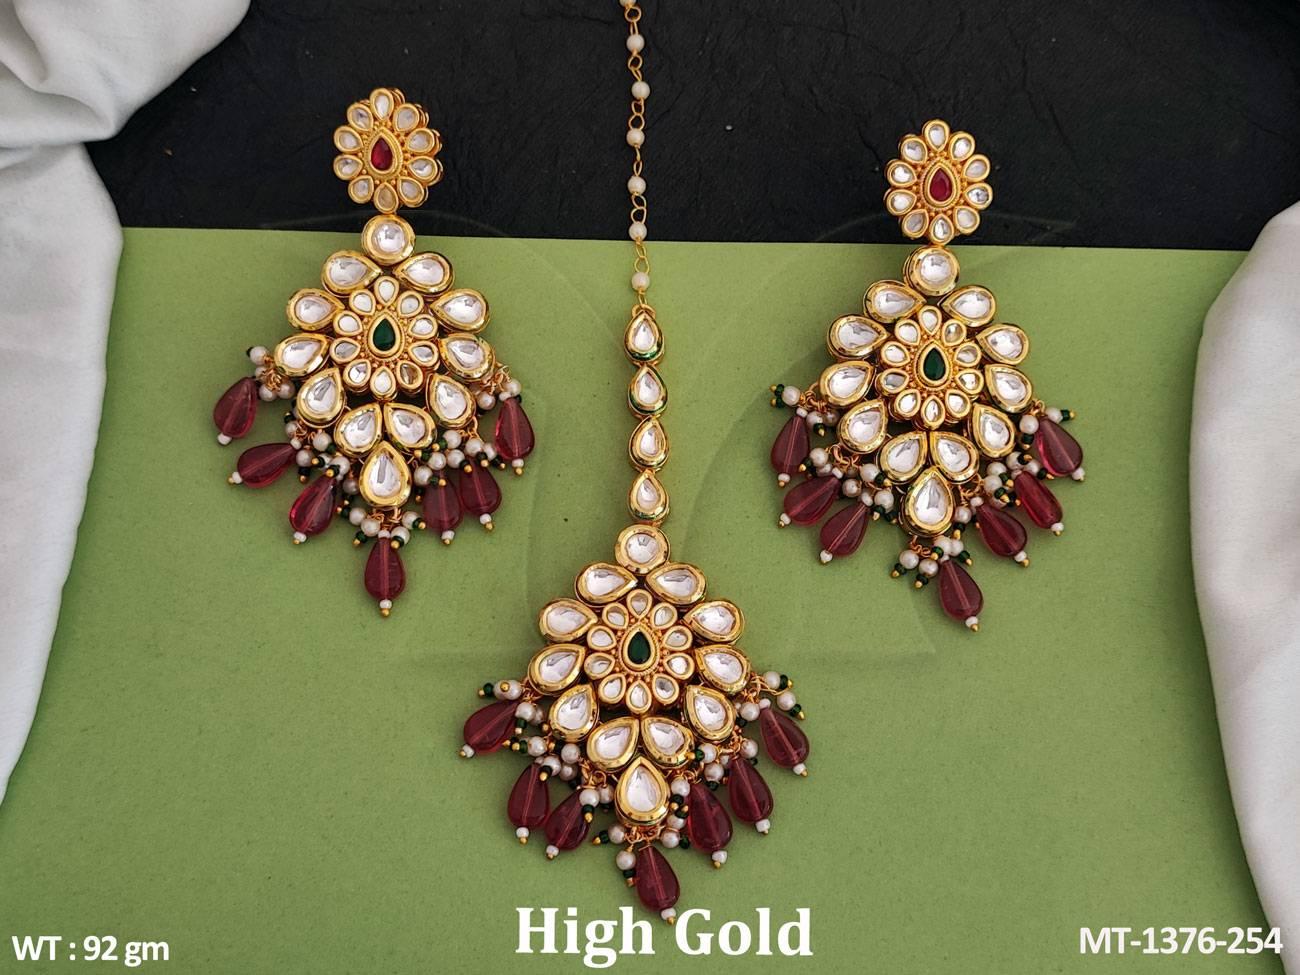 This beautiful kundan maang tikka and earring set is made of high-quality brass metal and features a high gold polish that adds a touch of elegance.